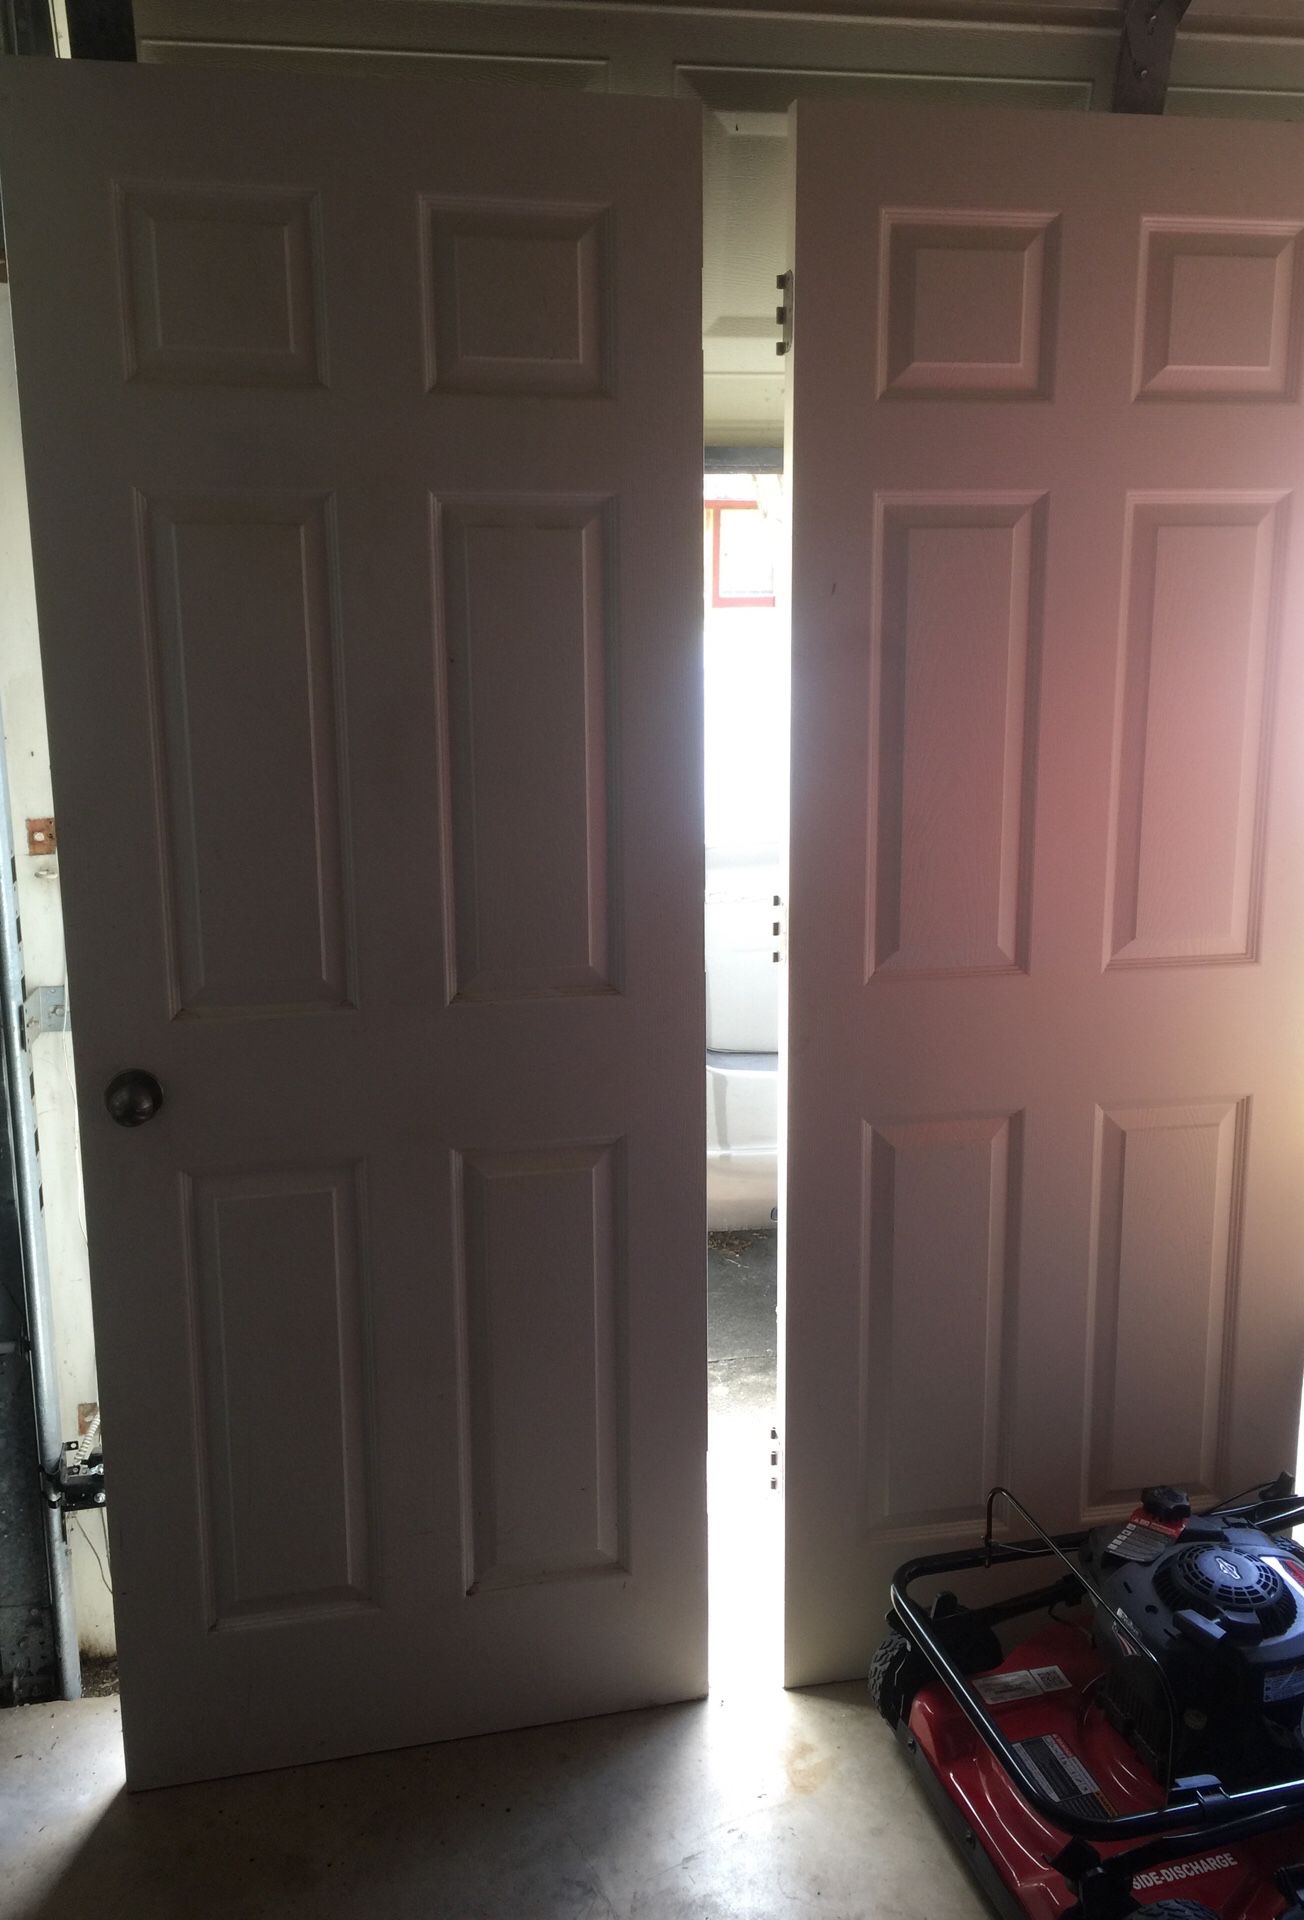 2 doors selling together